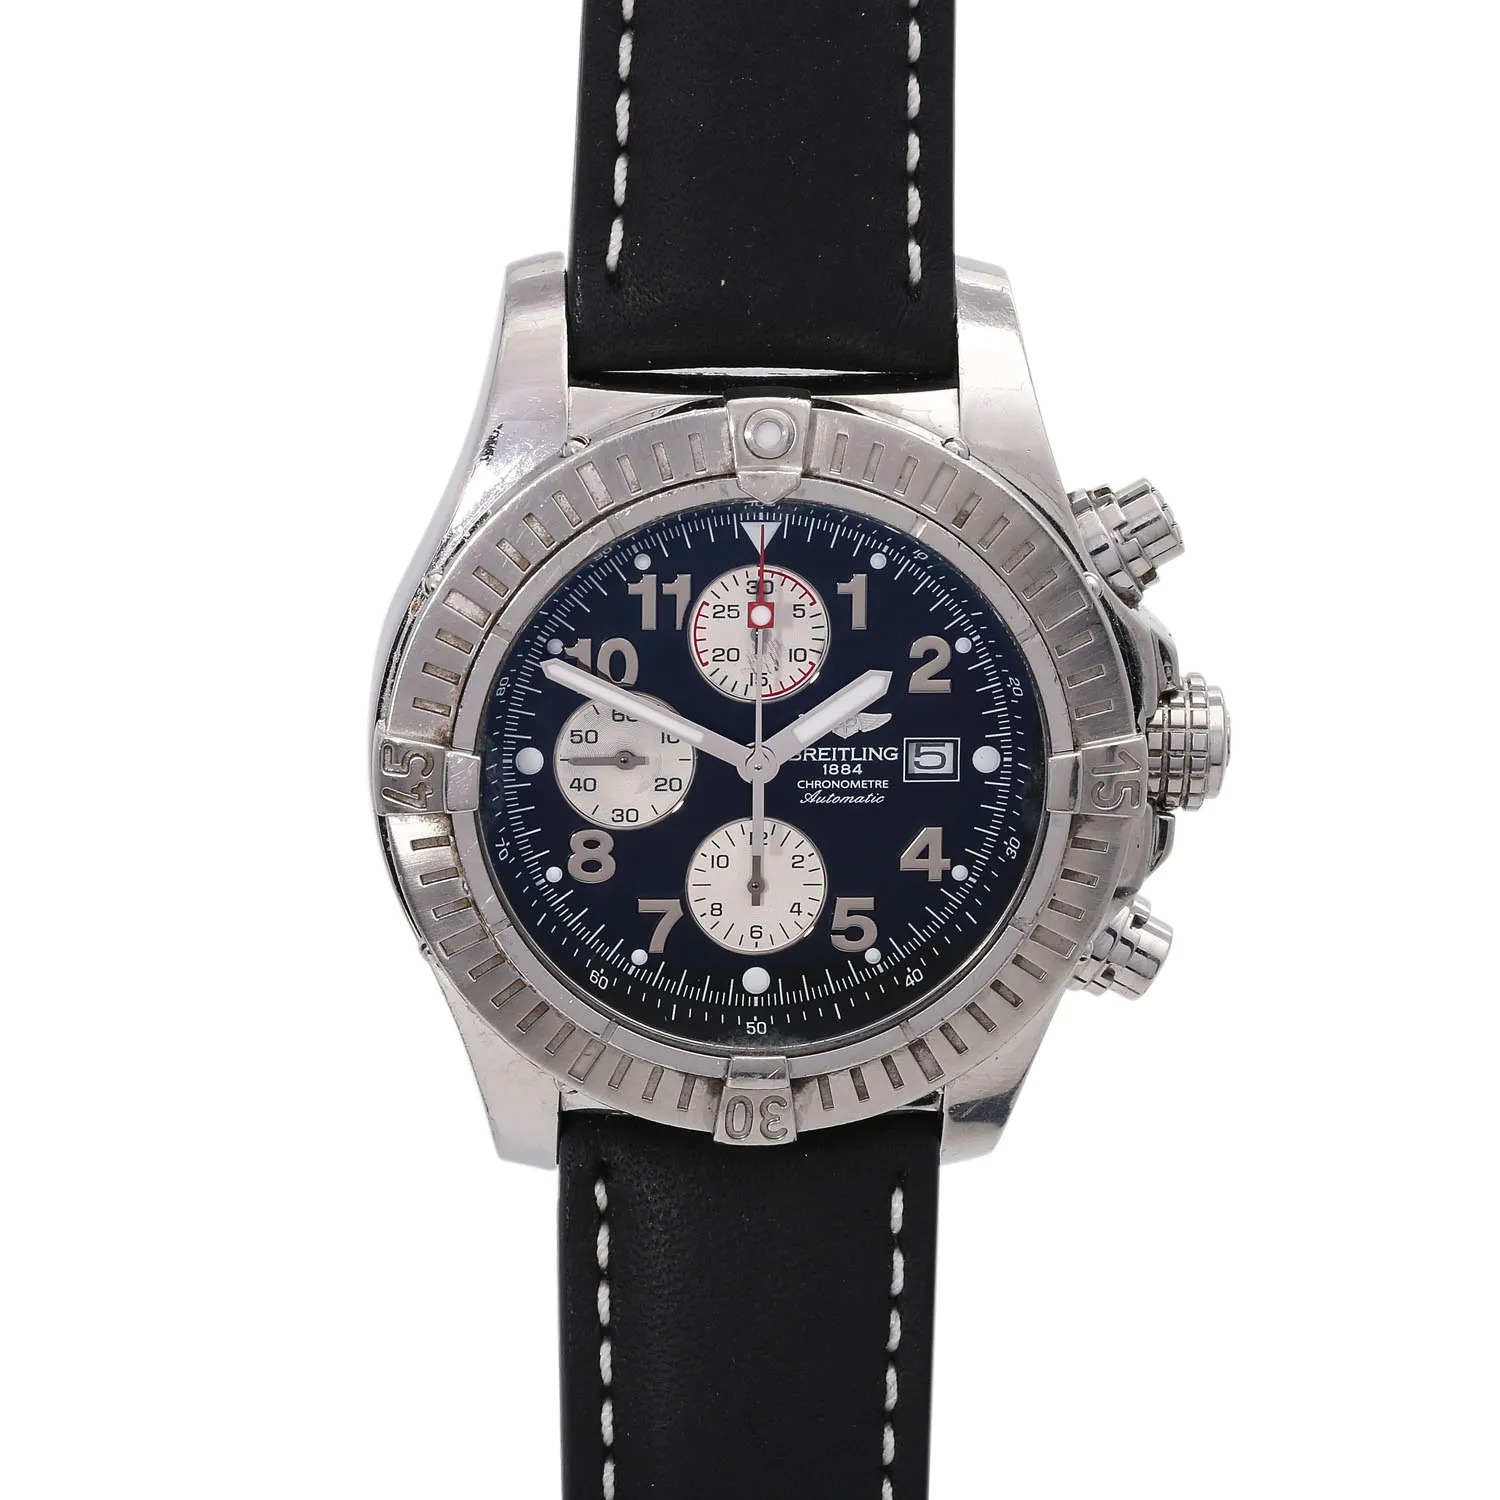 Breitling Avenger A13370 48mm Stainless steel bi-color black and silver